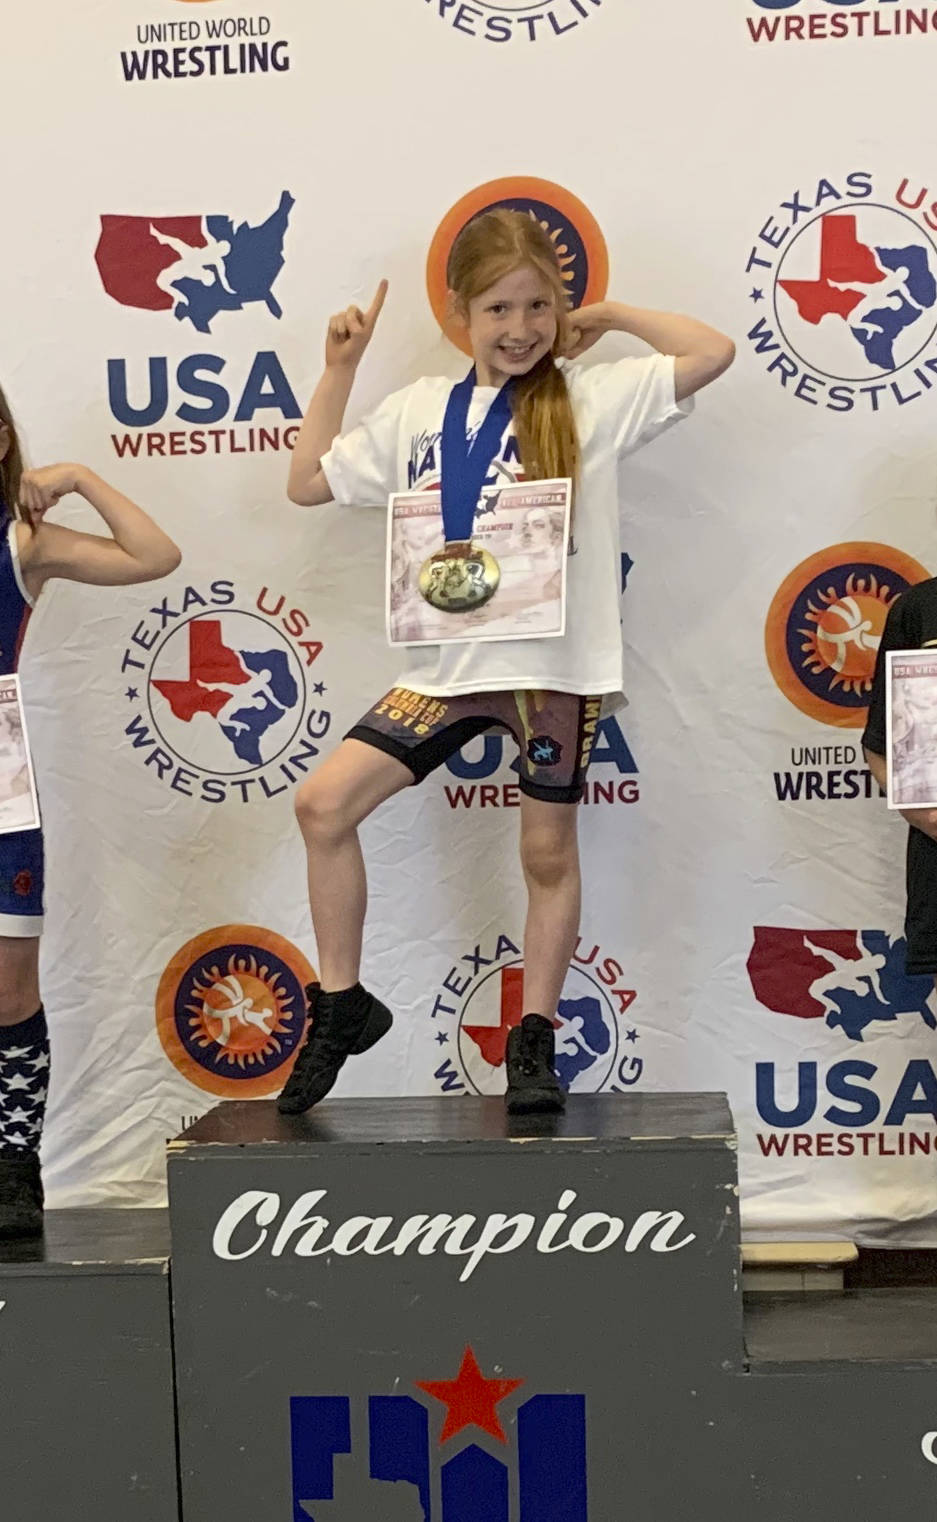 Arabella Chapman earned the top spot on the podium in the 55-pound weight class at the 2019 Women’s National Championships and World Team trials. Photo courtesy of Connie Chapman